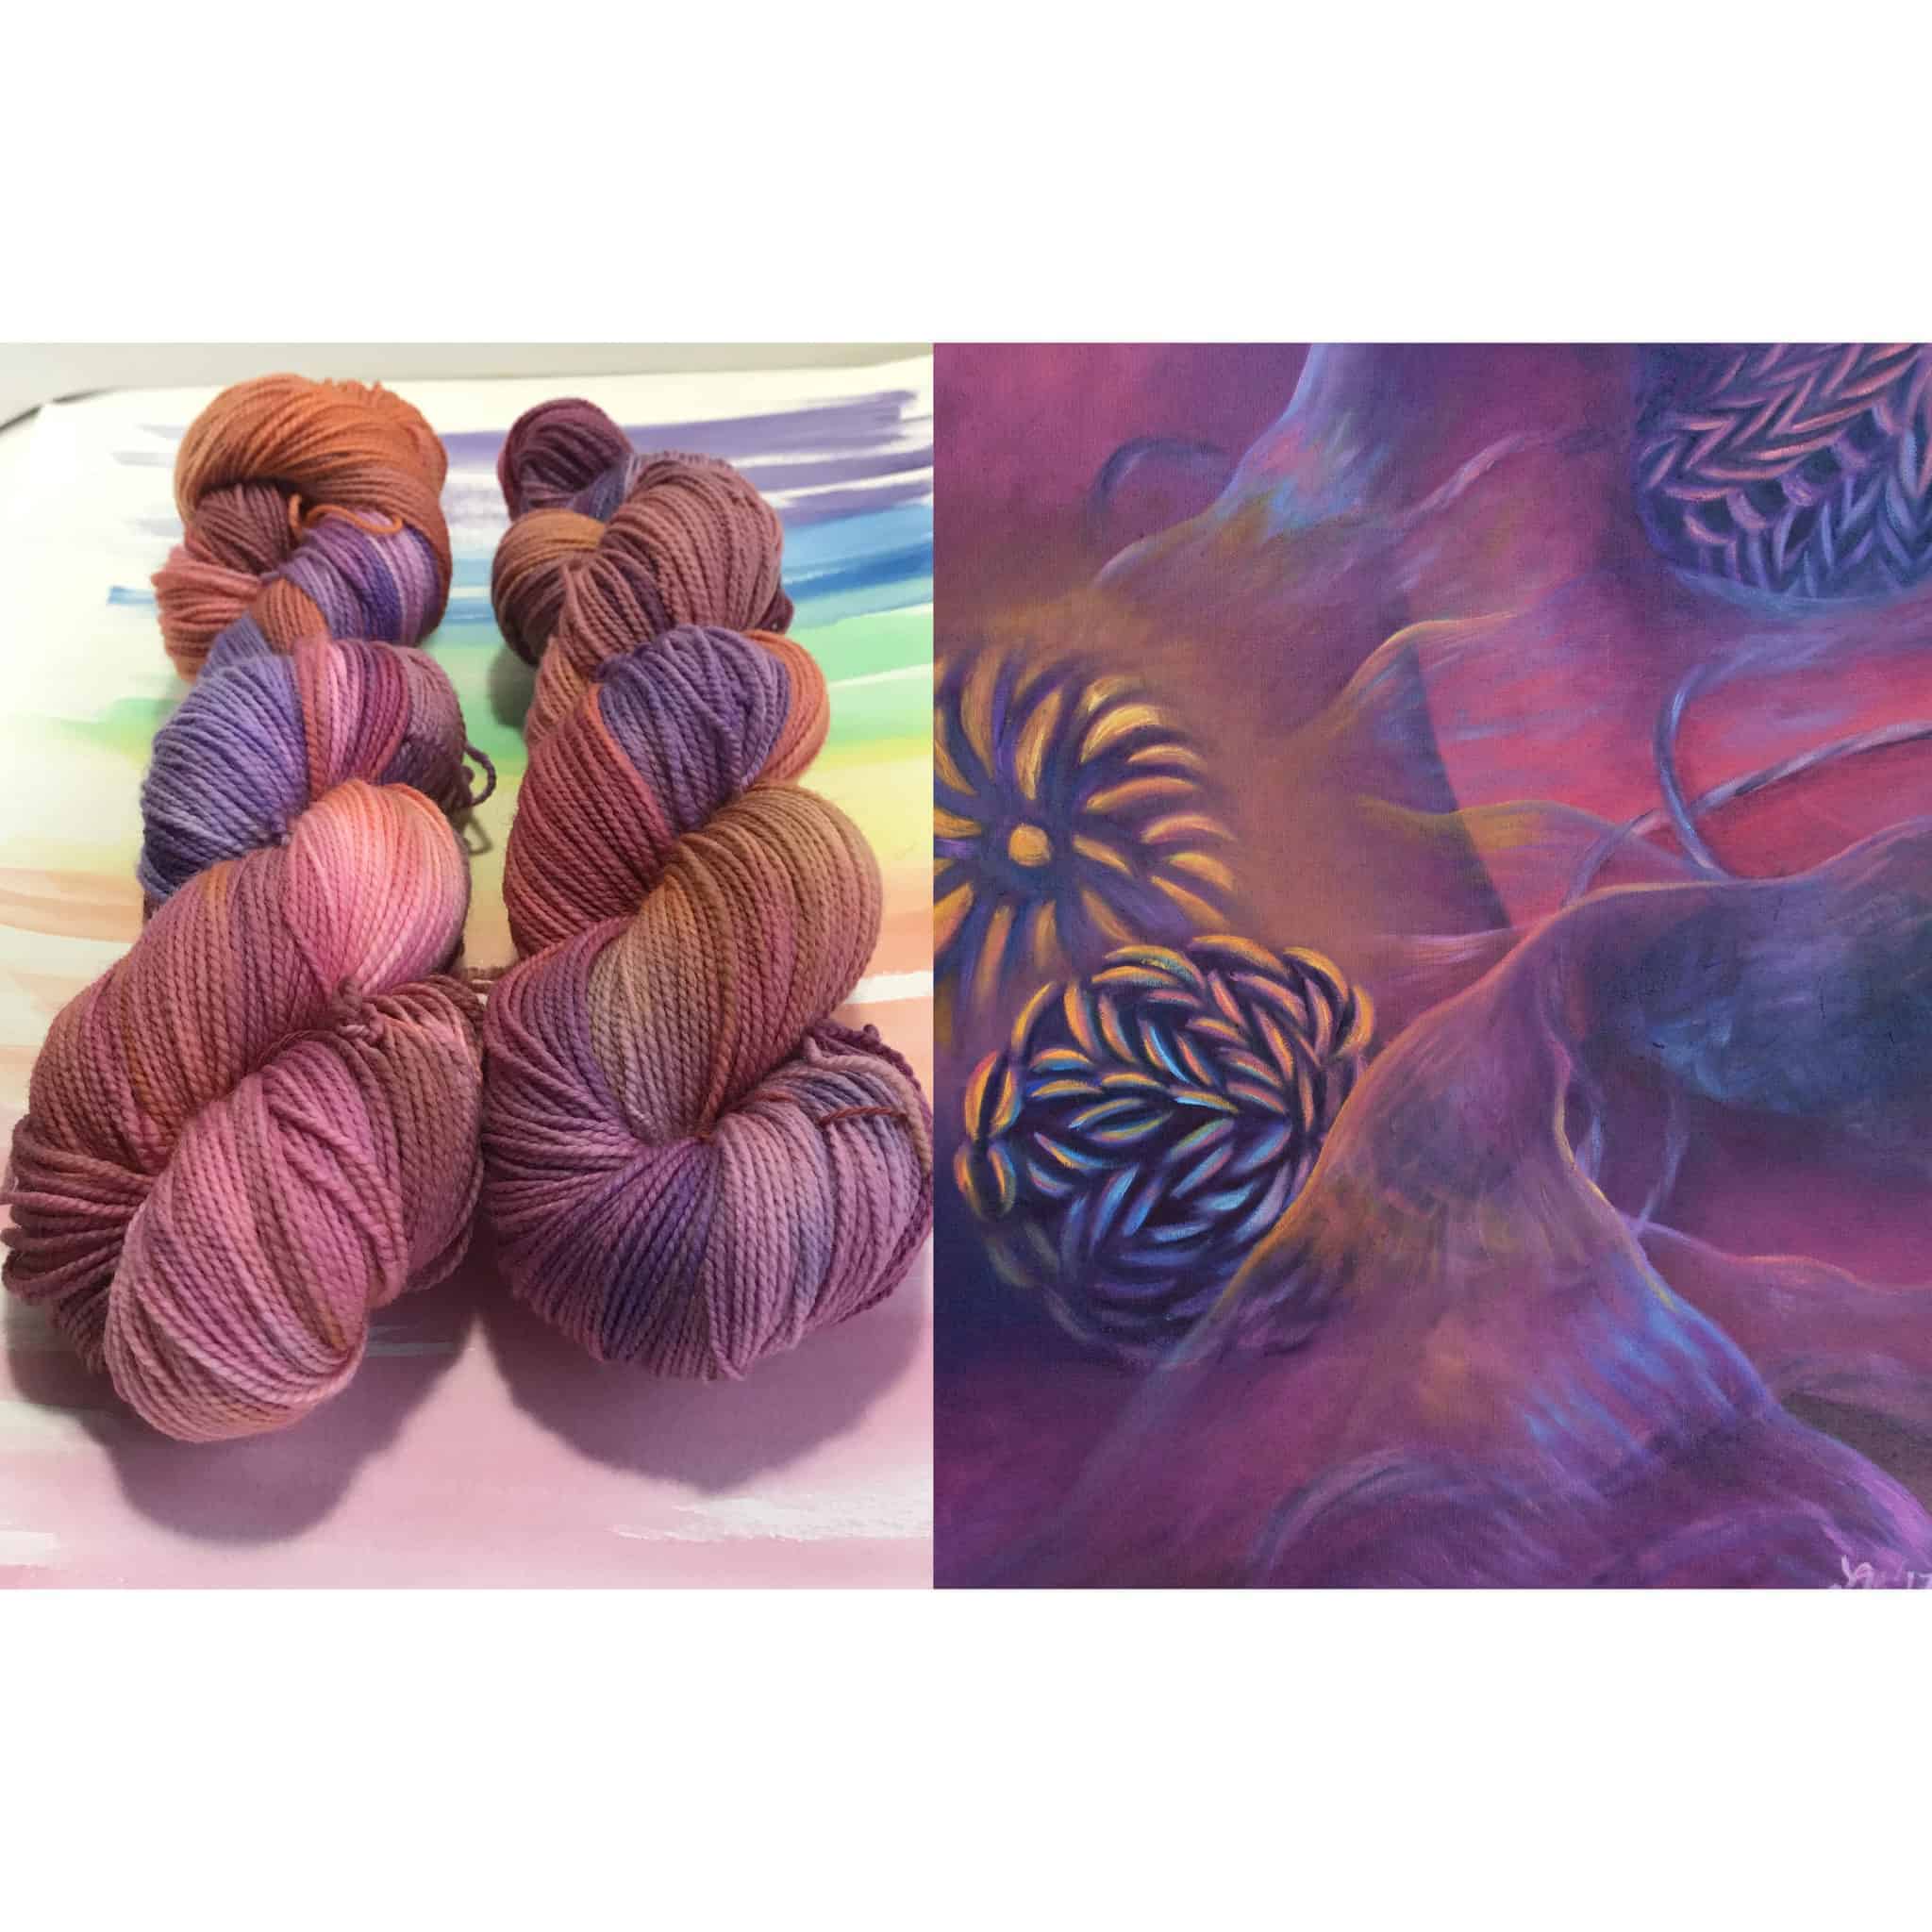 Purple and blue yarn next to a purple and blue painting. 